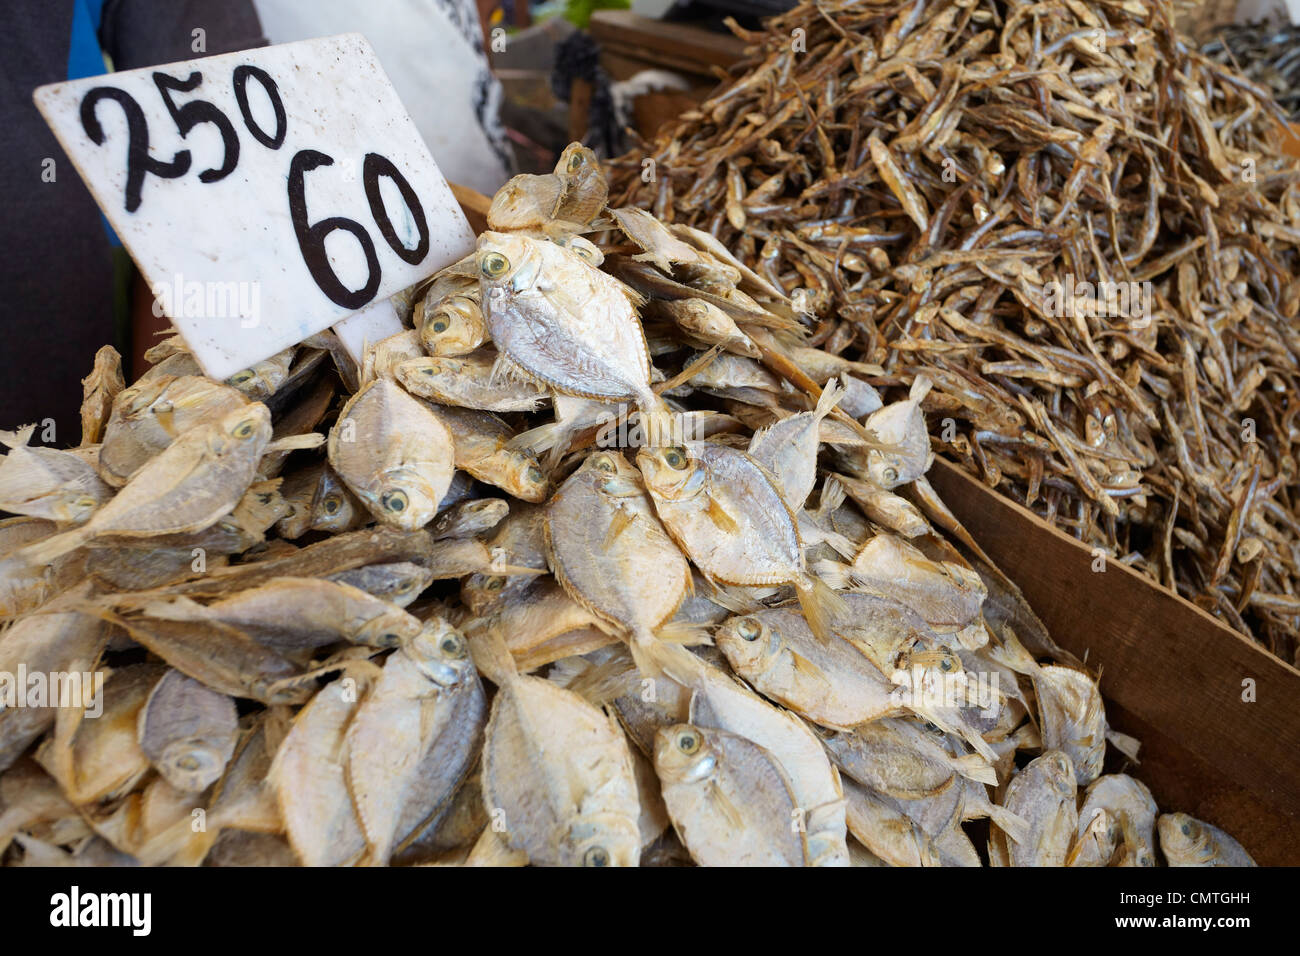 Sri Lanka - Colombo, dried and salted fish at the market Stock Photo